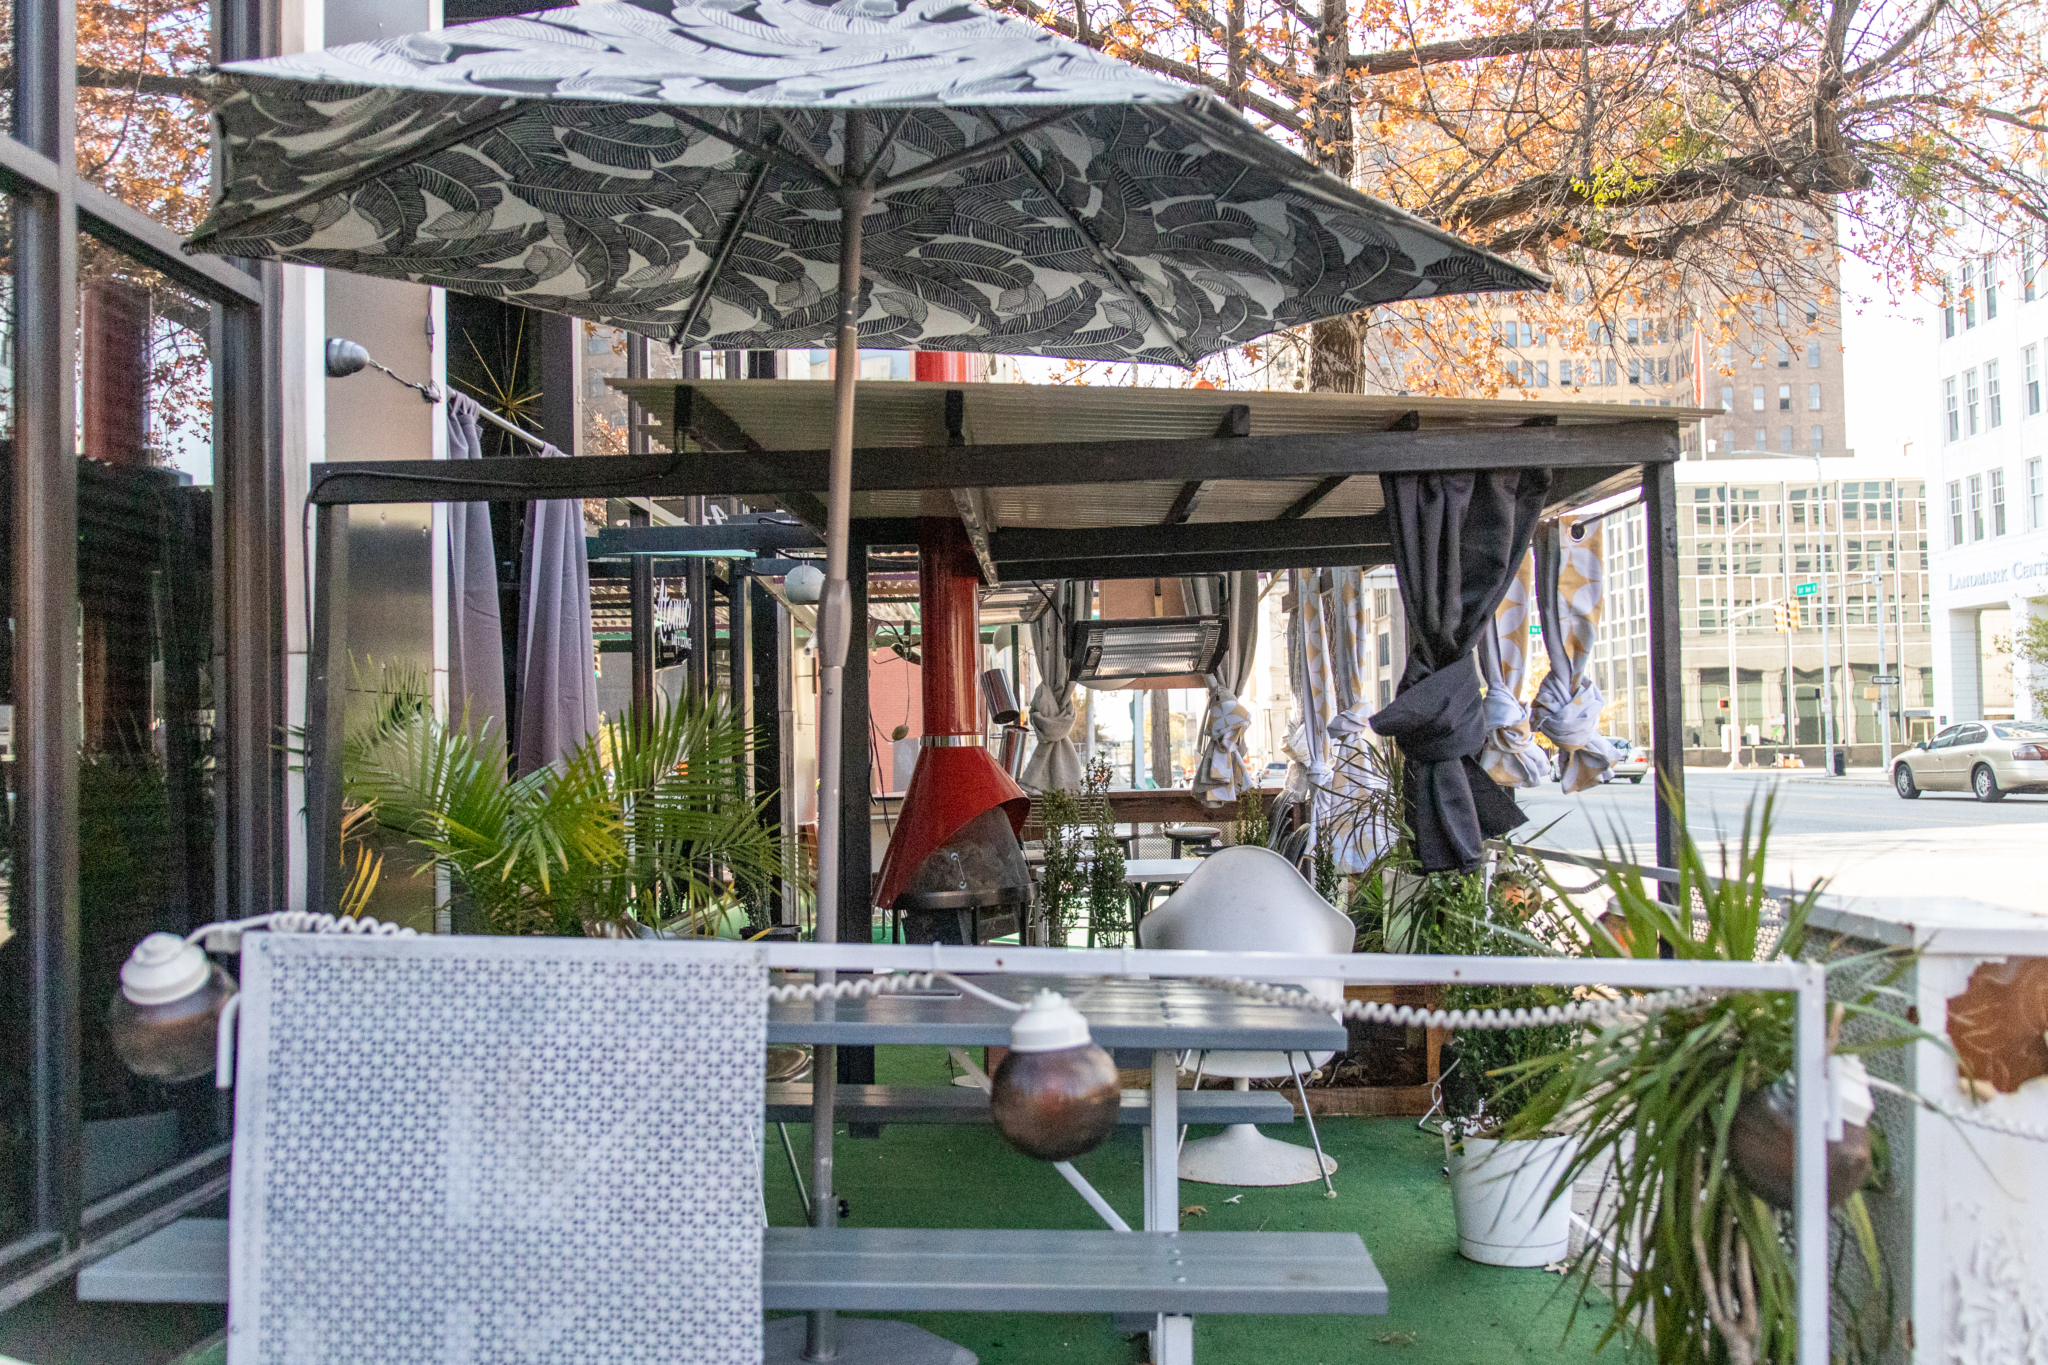 Heated Patios 10 Winter is coming. Checking out local restaurants and bars with heated patios + tents